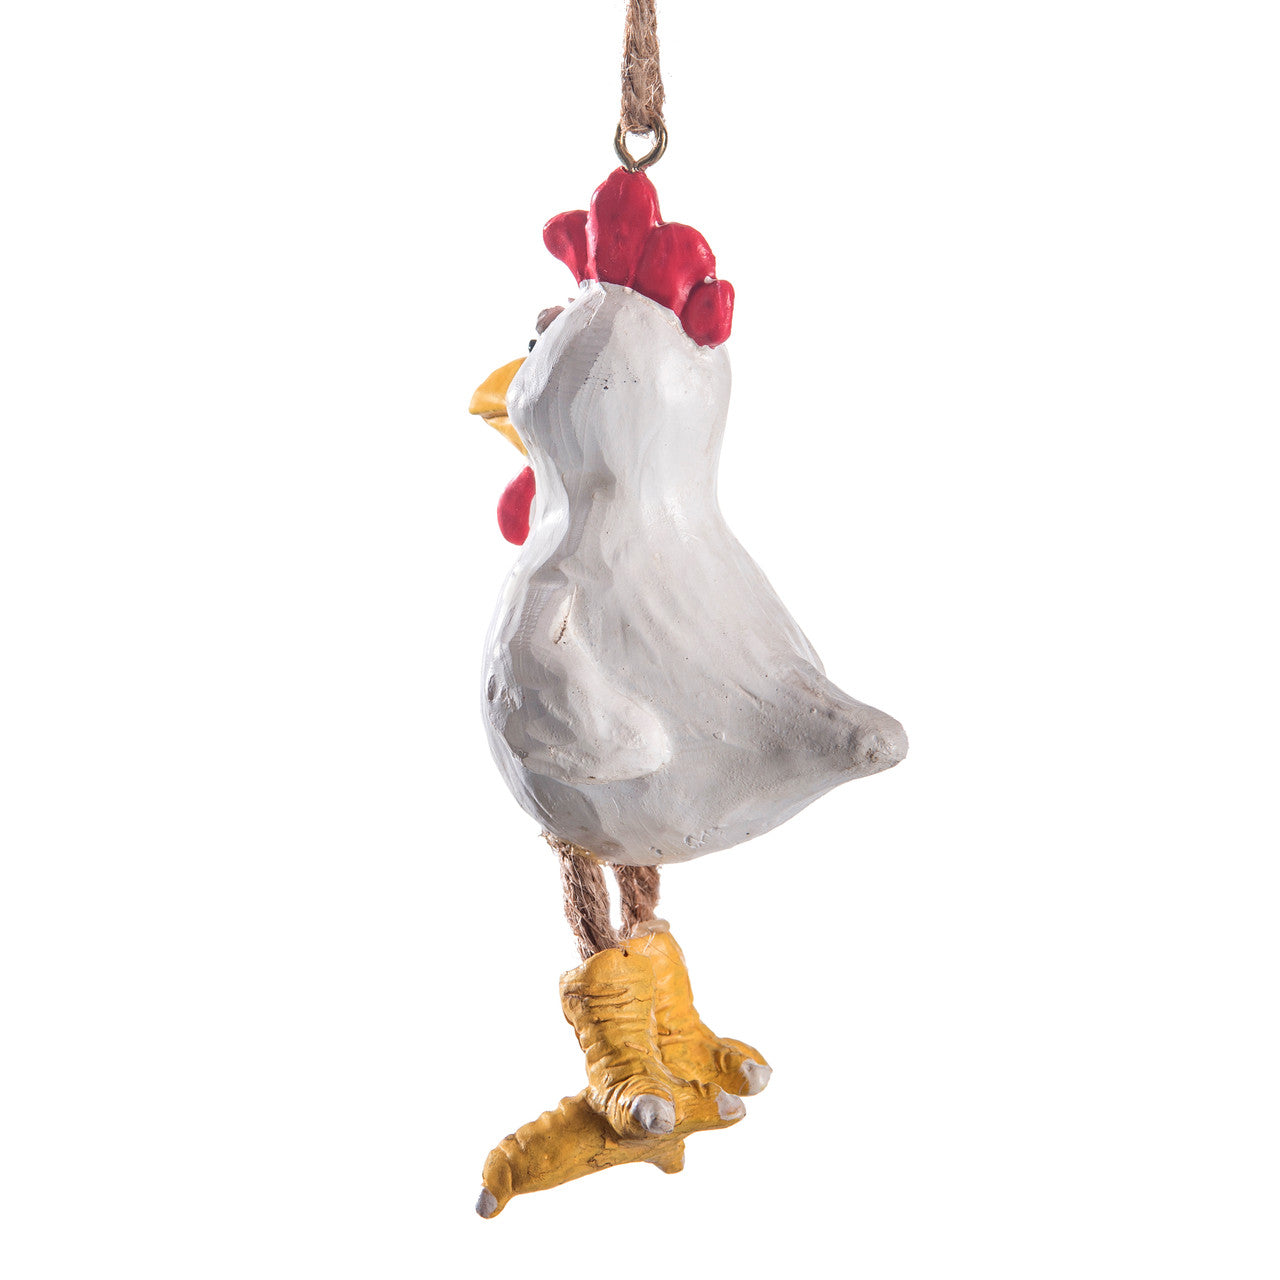 Bac 017 Chicken Ornament Set of 3